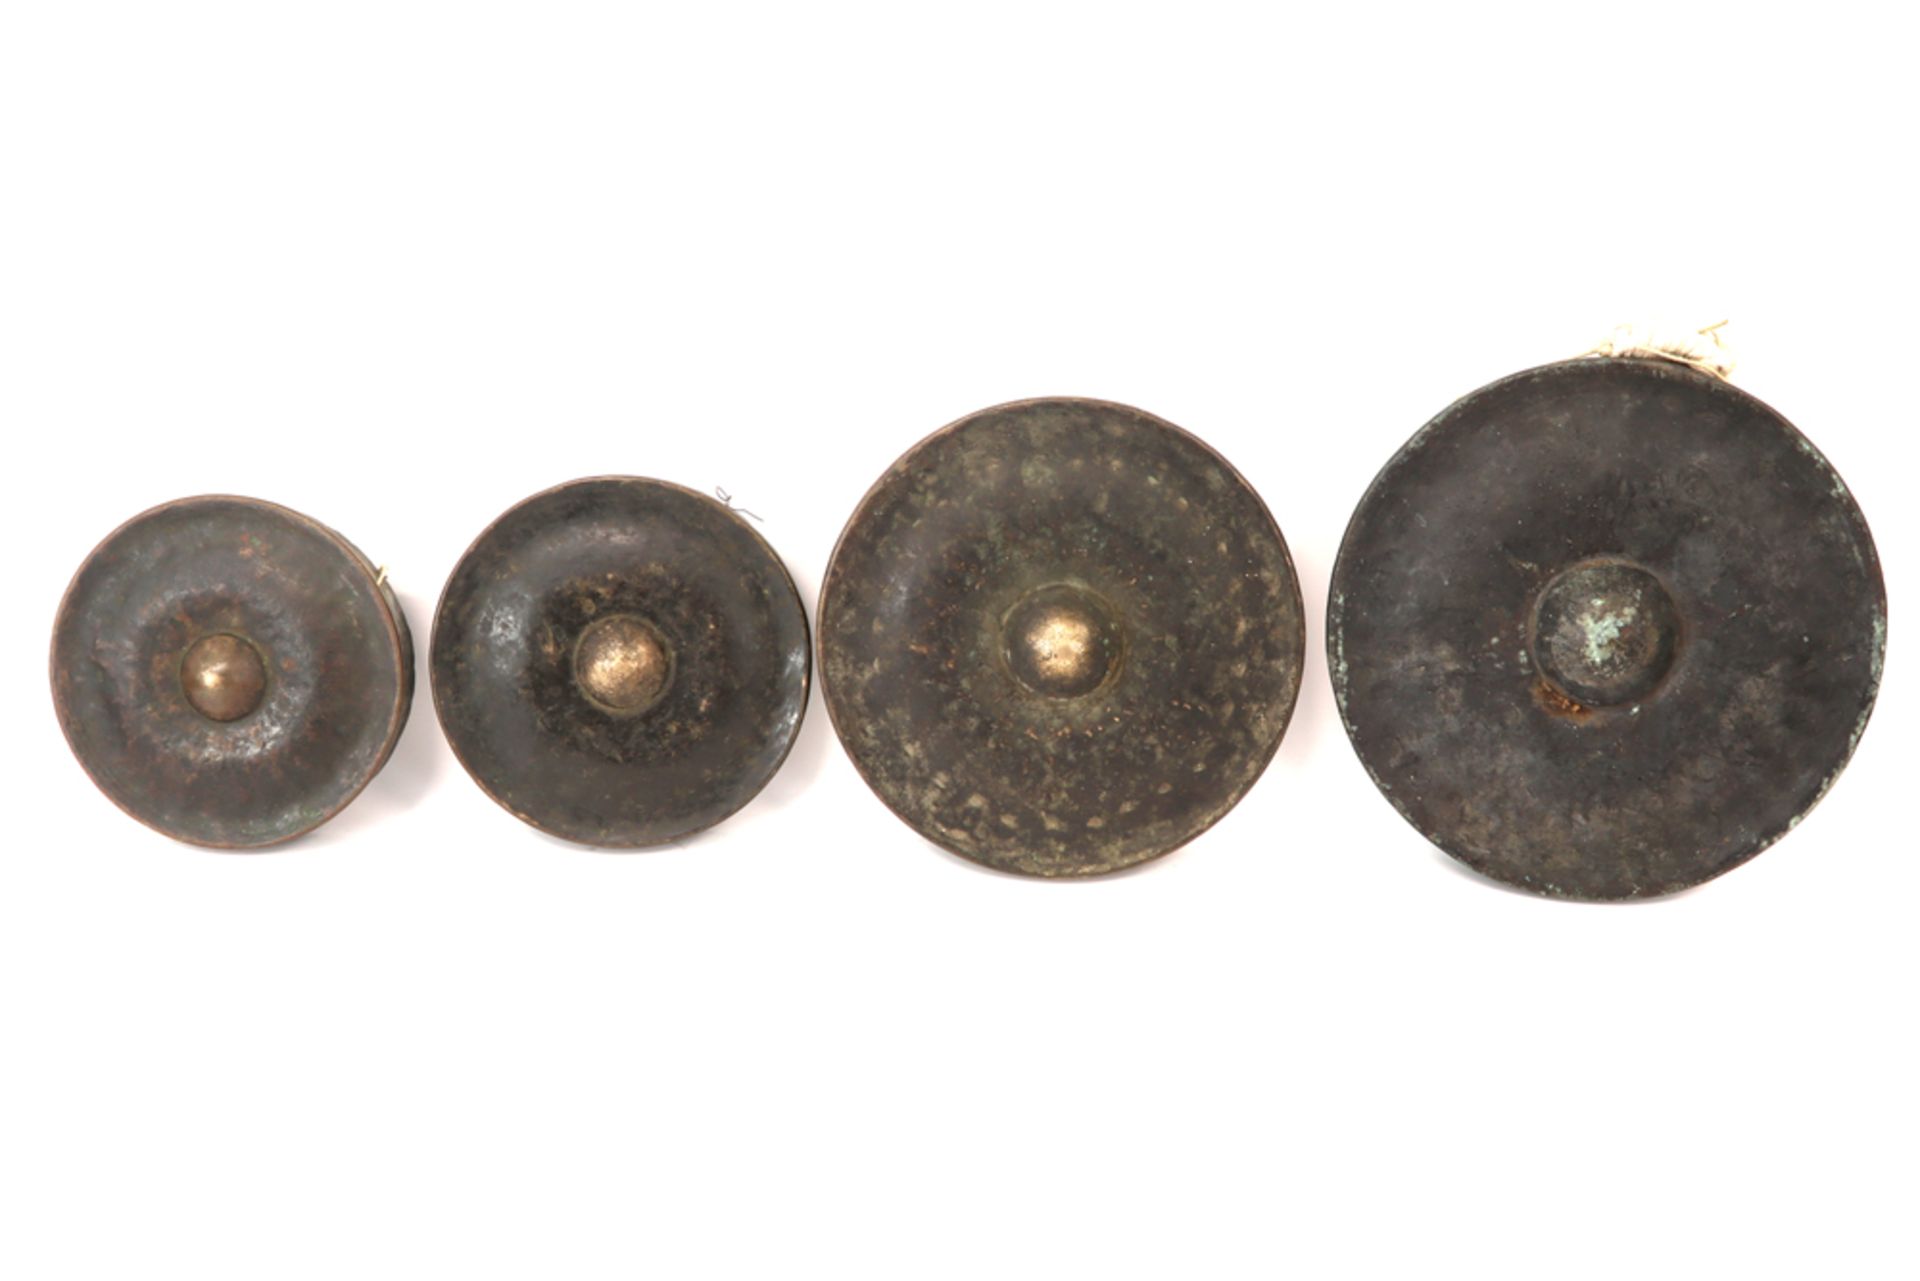 set of ten Northern Indian Naga gongs, used during ceremonial dances, festivals and initiation rites - Image 3 of 4